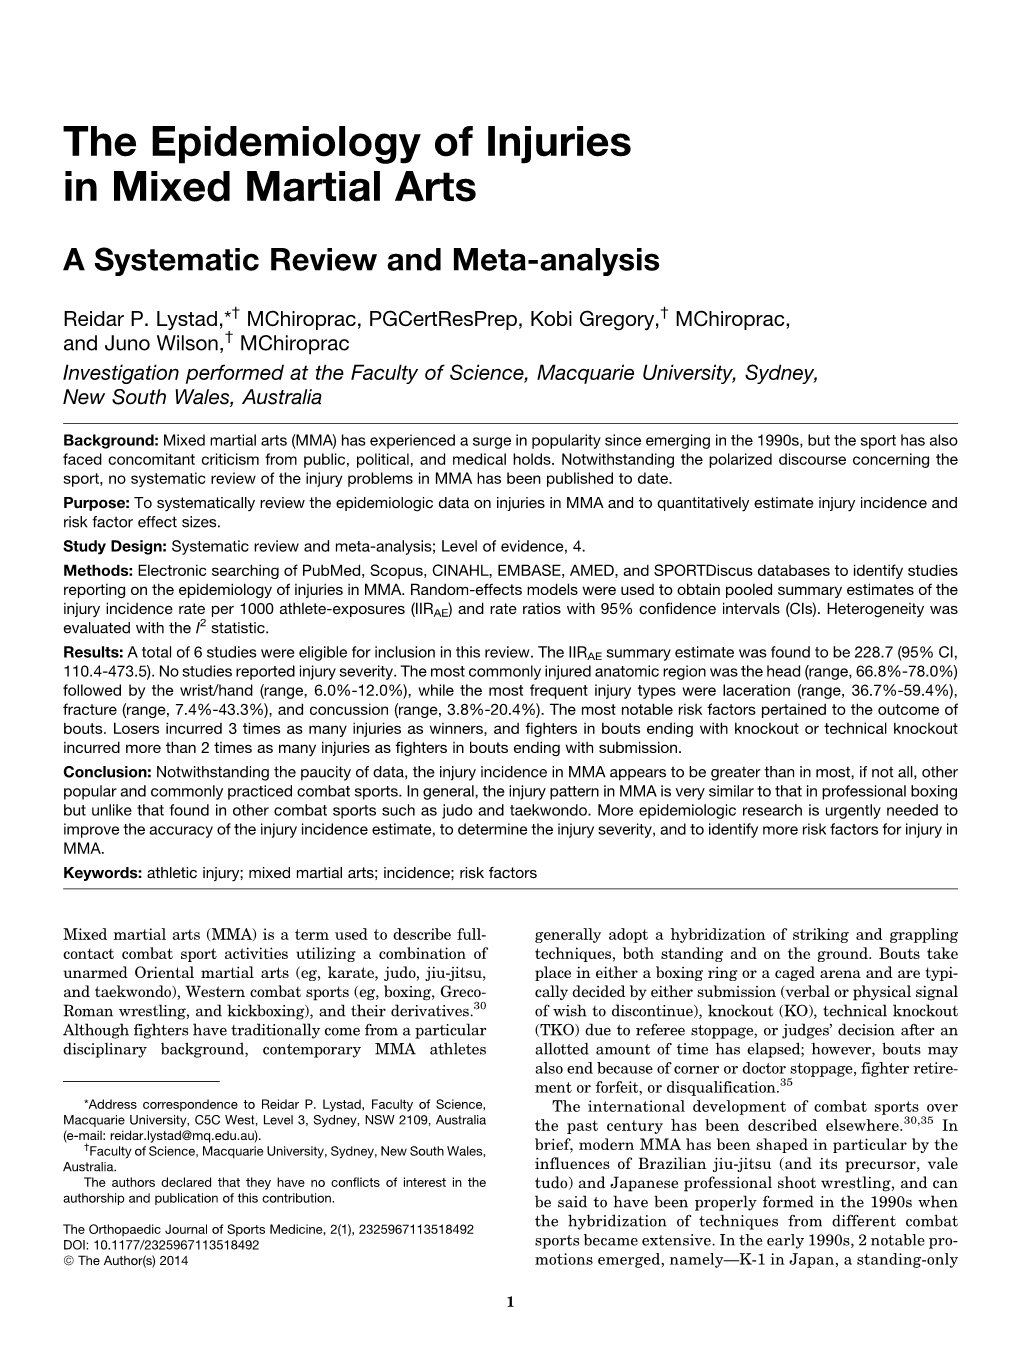 The Epidemiology of Injuries in Mixed Martial Arts